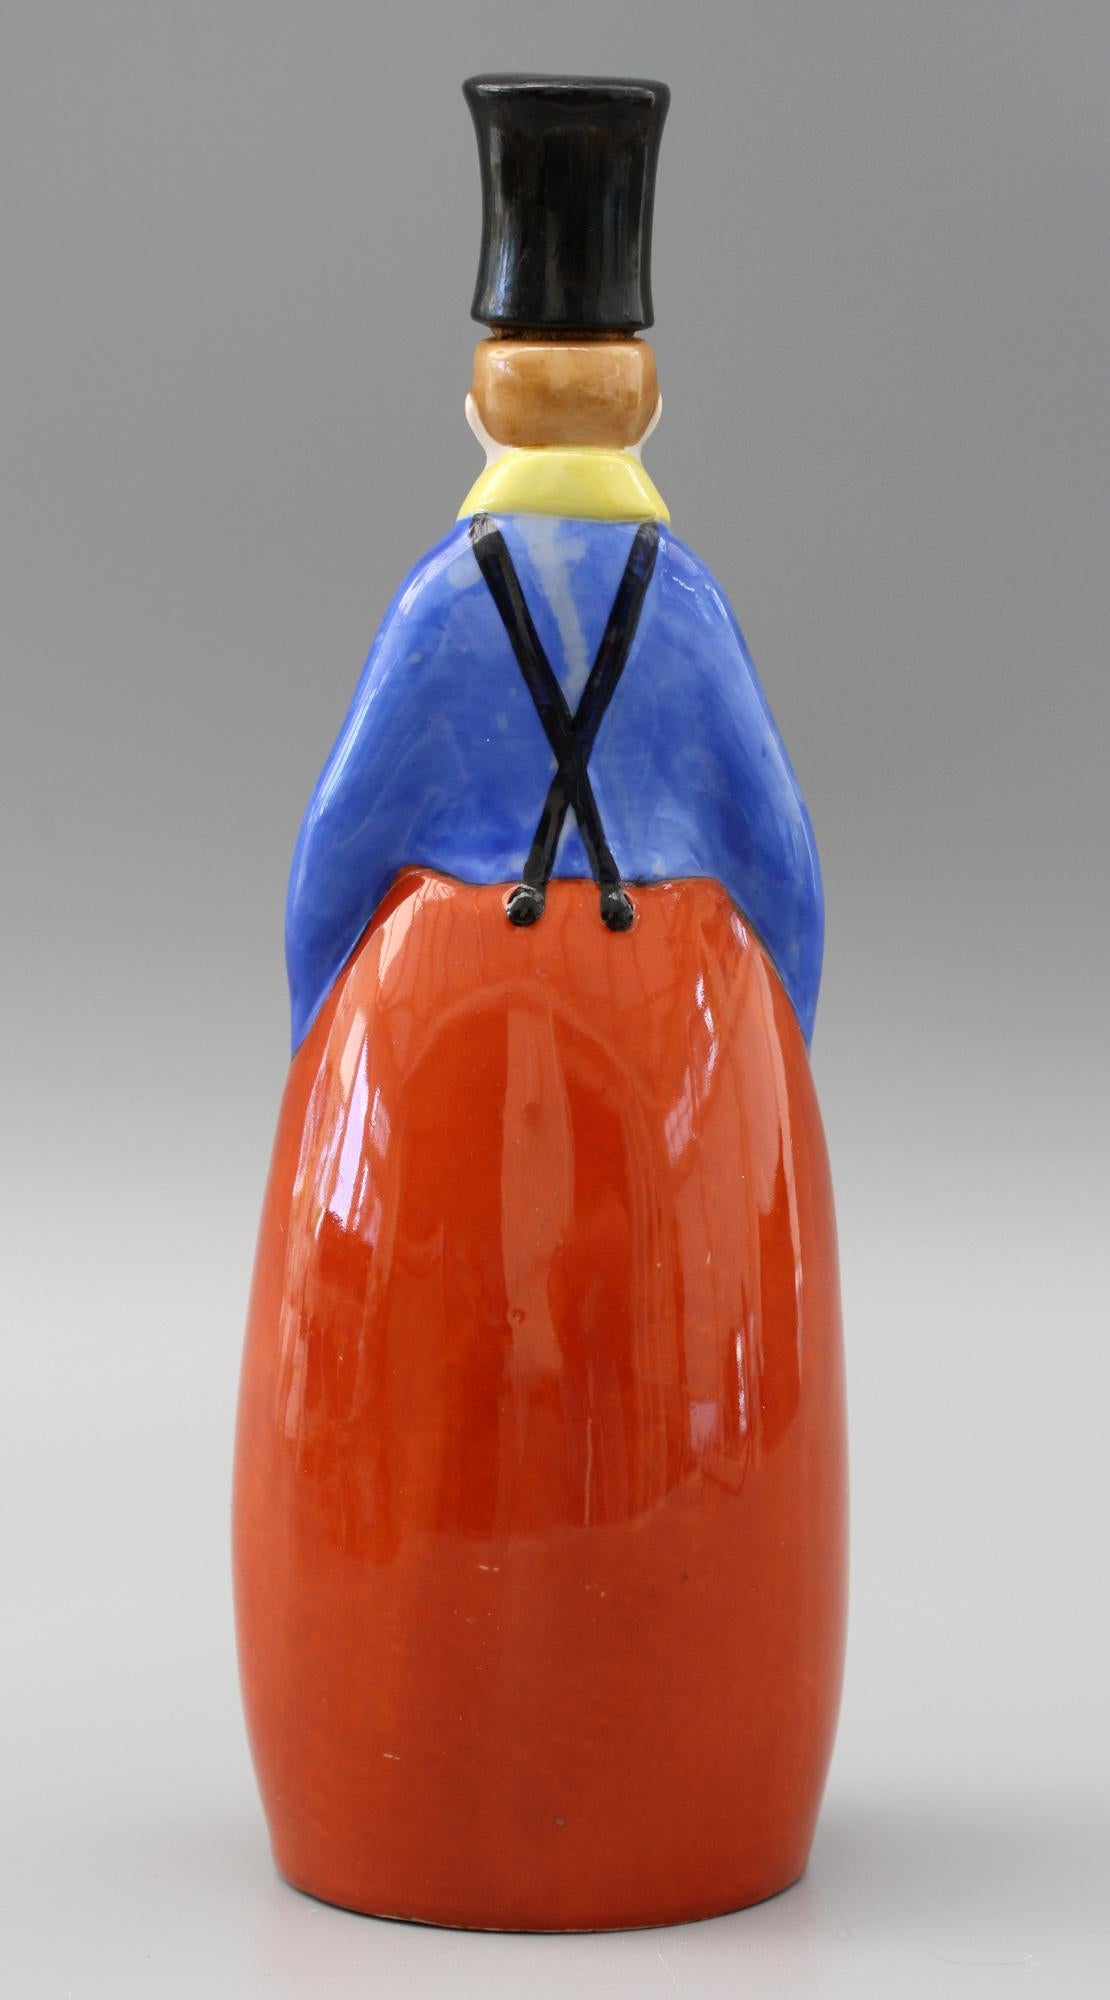 A delightful French Art Deco porcelain bottle, attributed to ROBJ Paris, modeled as a young boy wearing a tall hat dating from circa 1930. The finely made bottle portrays the boy standing his hands in his pockets and the apron held up by braces with